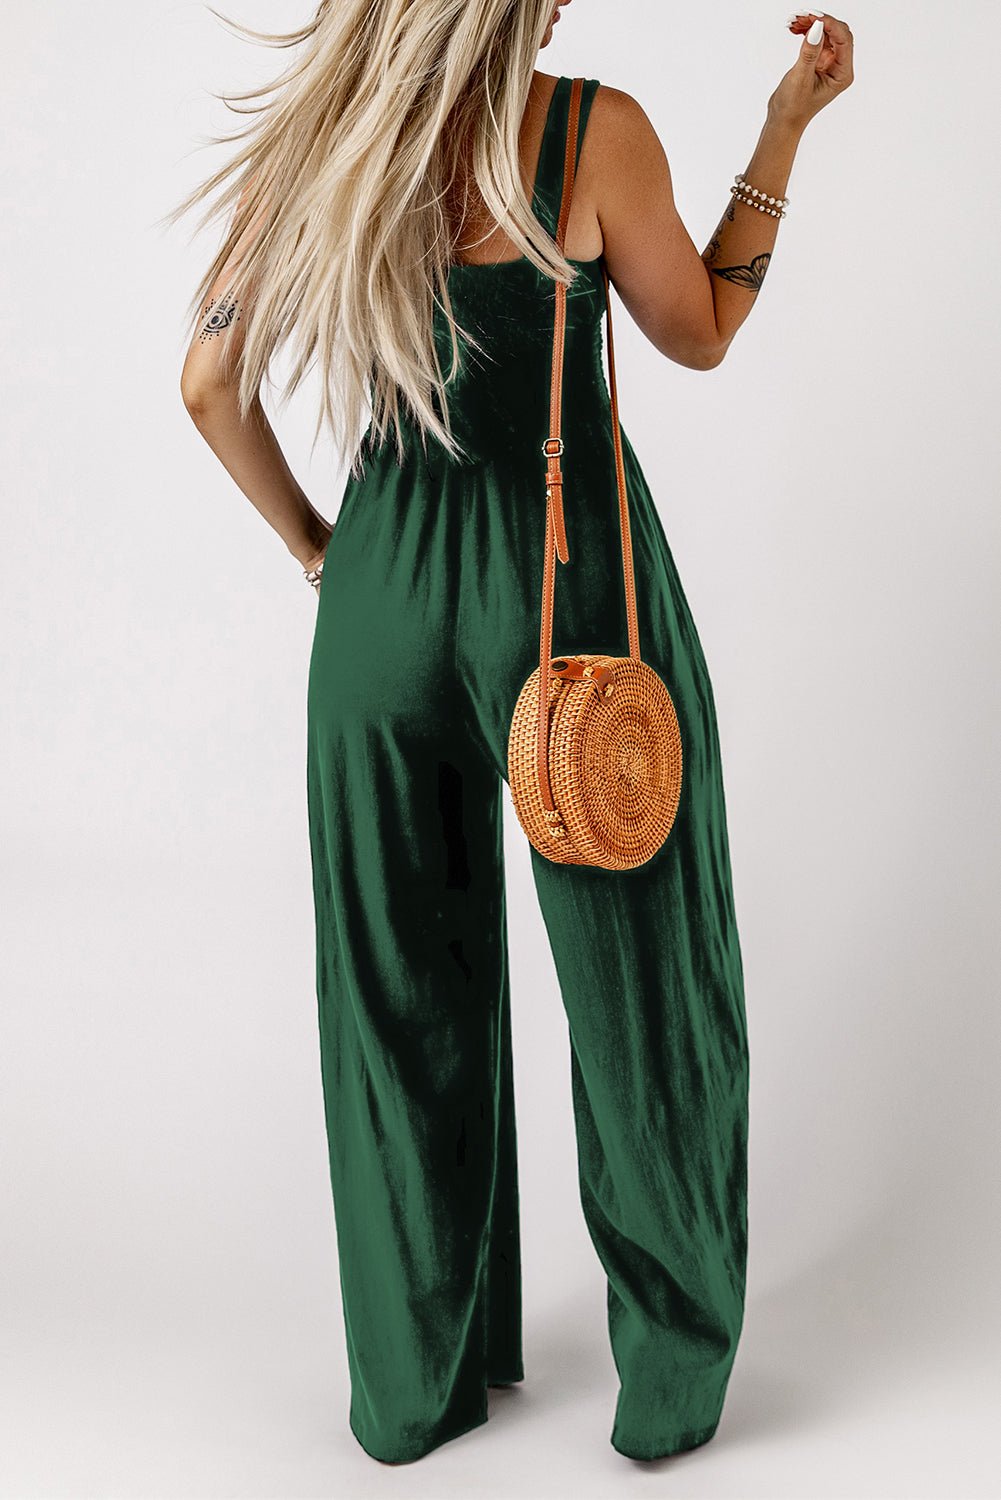 Smocked Square Neck Wide Leg Jumpsuit with Pockets - Fashion Girl Online Store